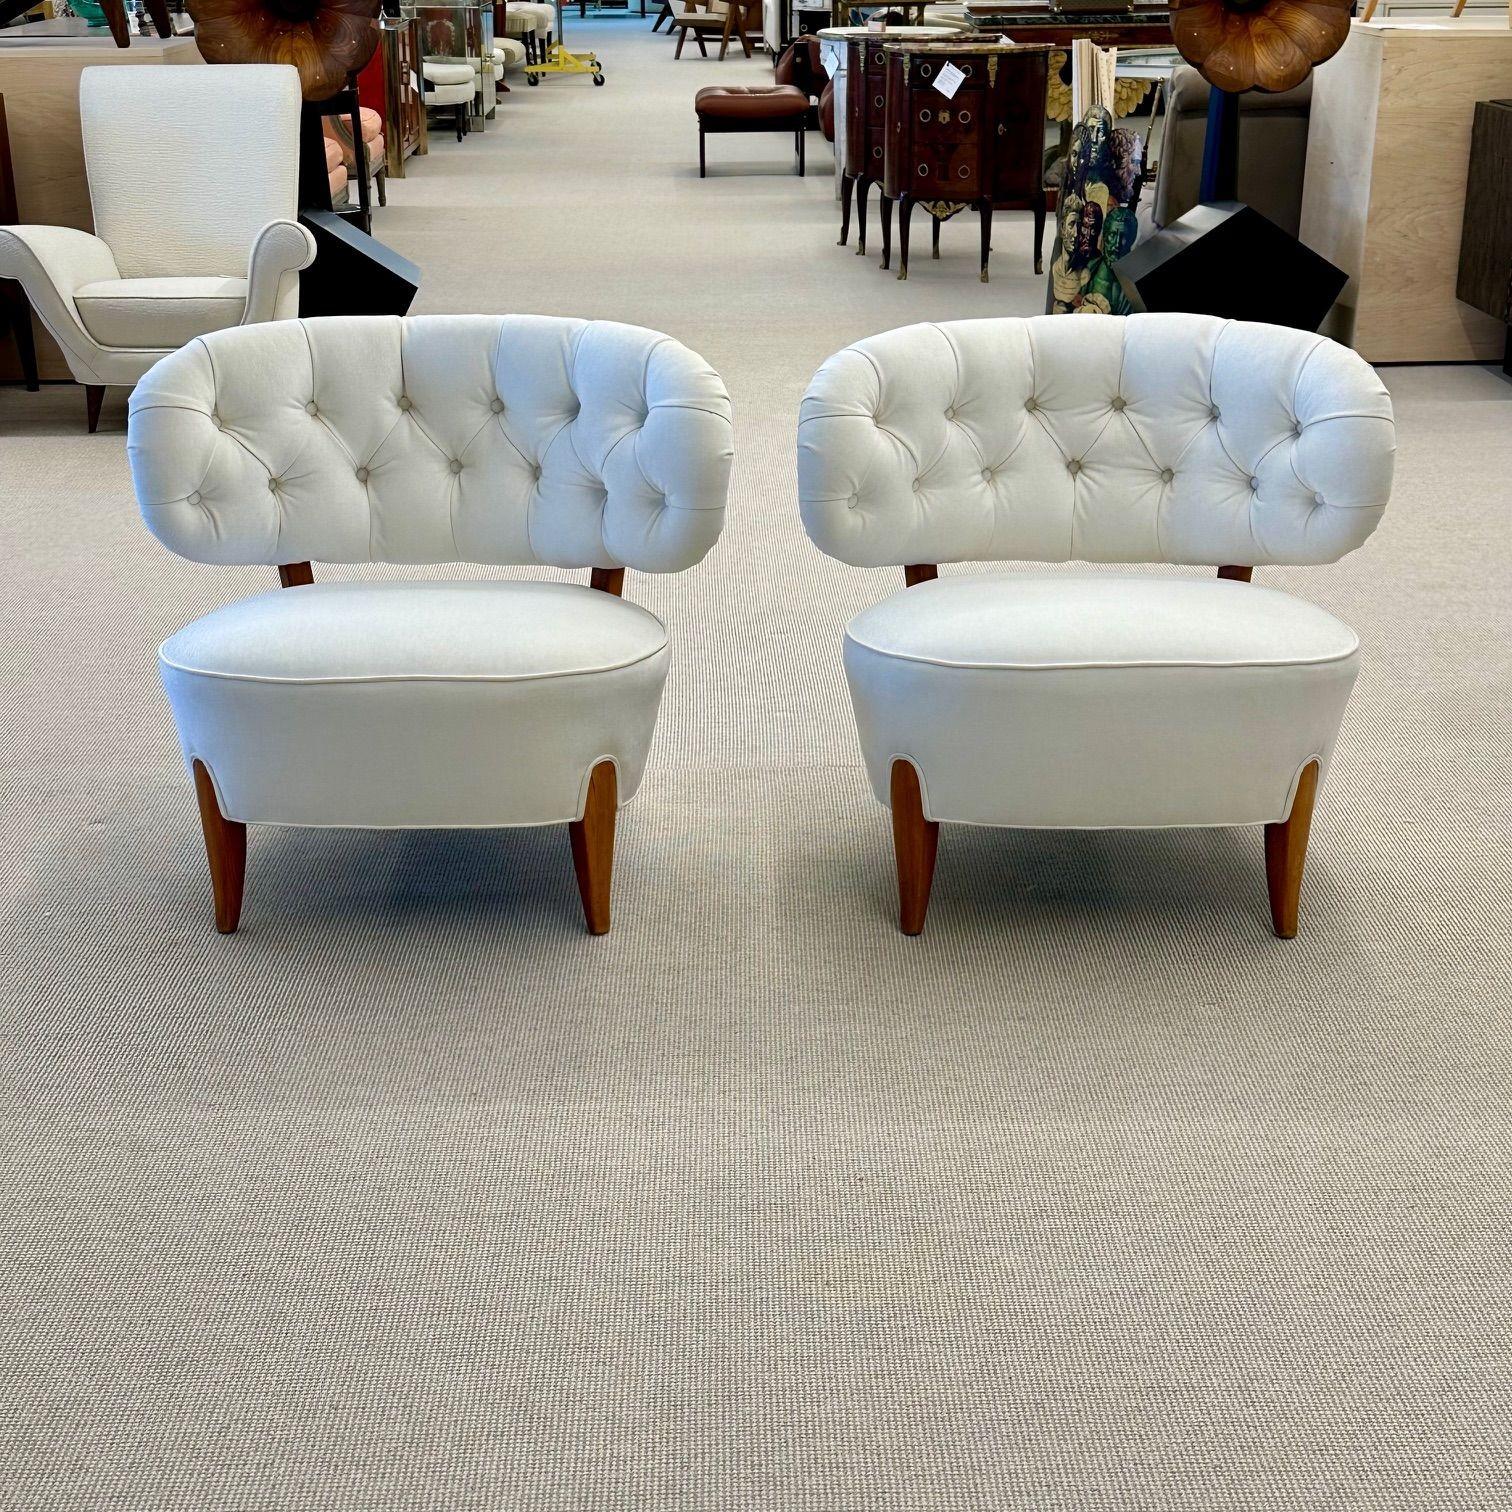 Otto Schulz, Mid-Century Lounge Chairs, White Velvet, Beech, Sweden, 1940s For Sale 12